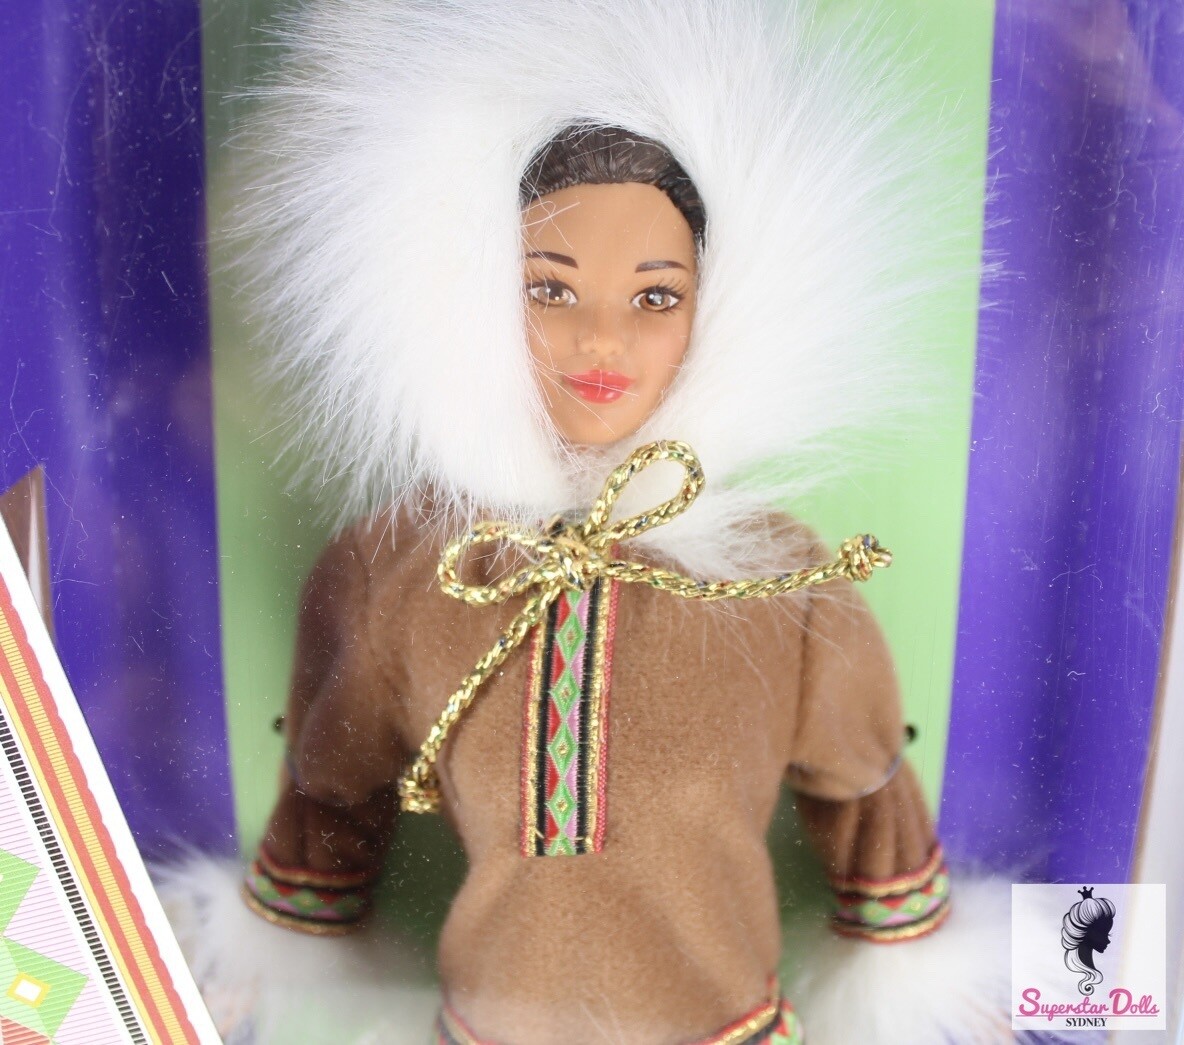 1996 Collector Edition "Arctic" Barbie from the Dolls of the World Collection